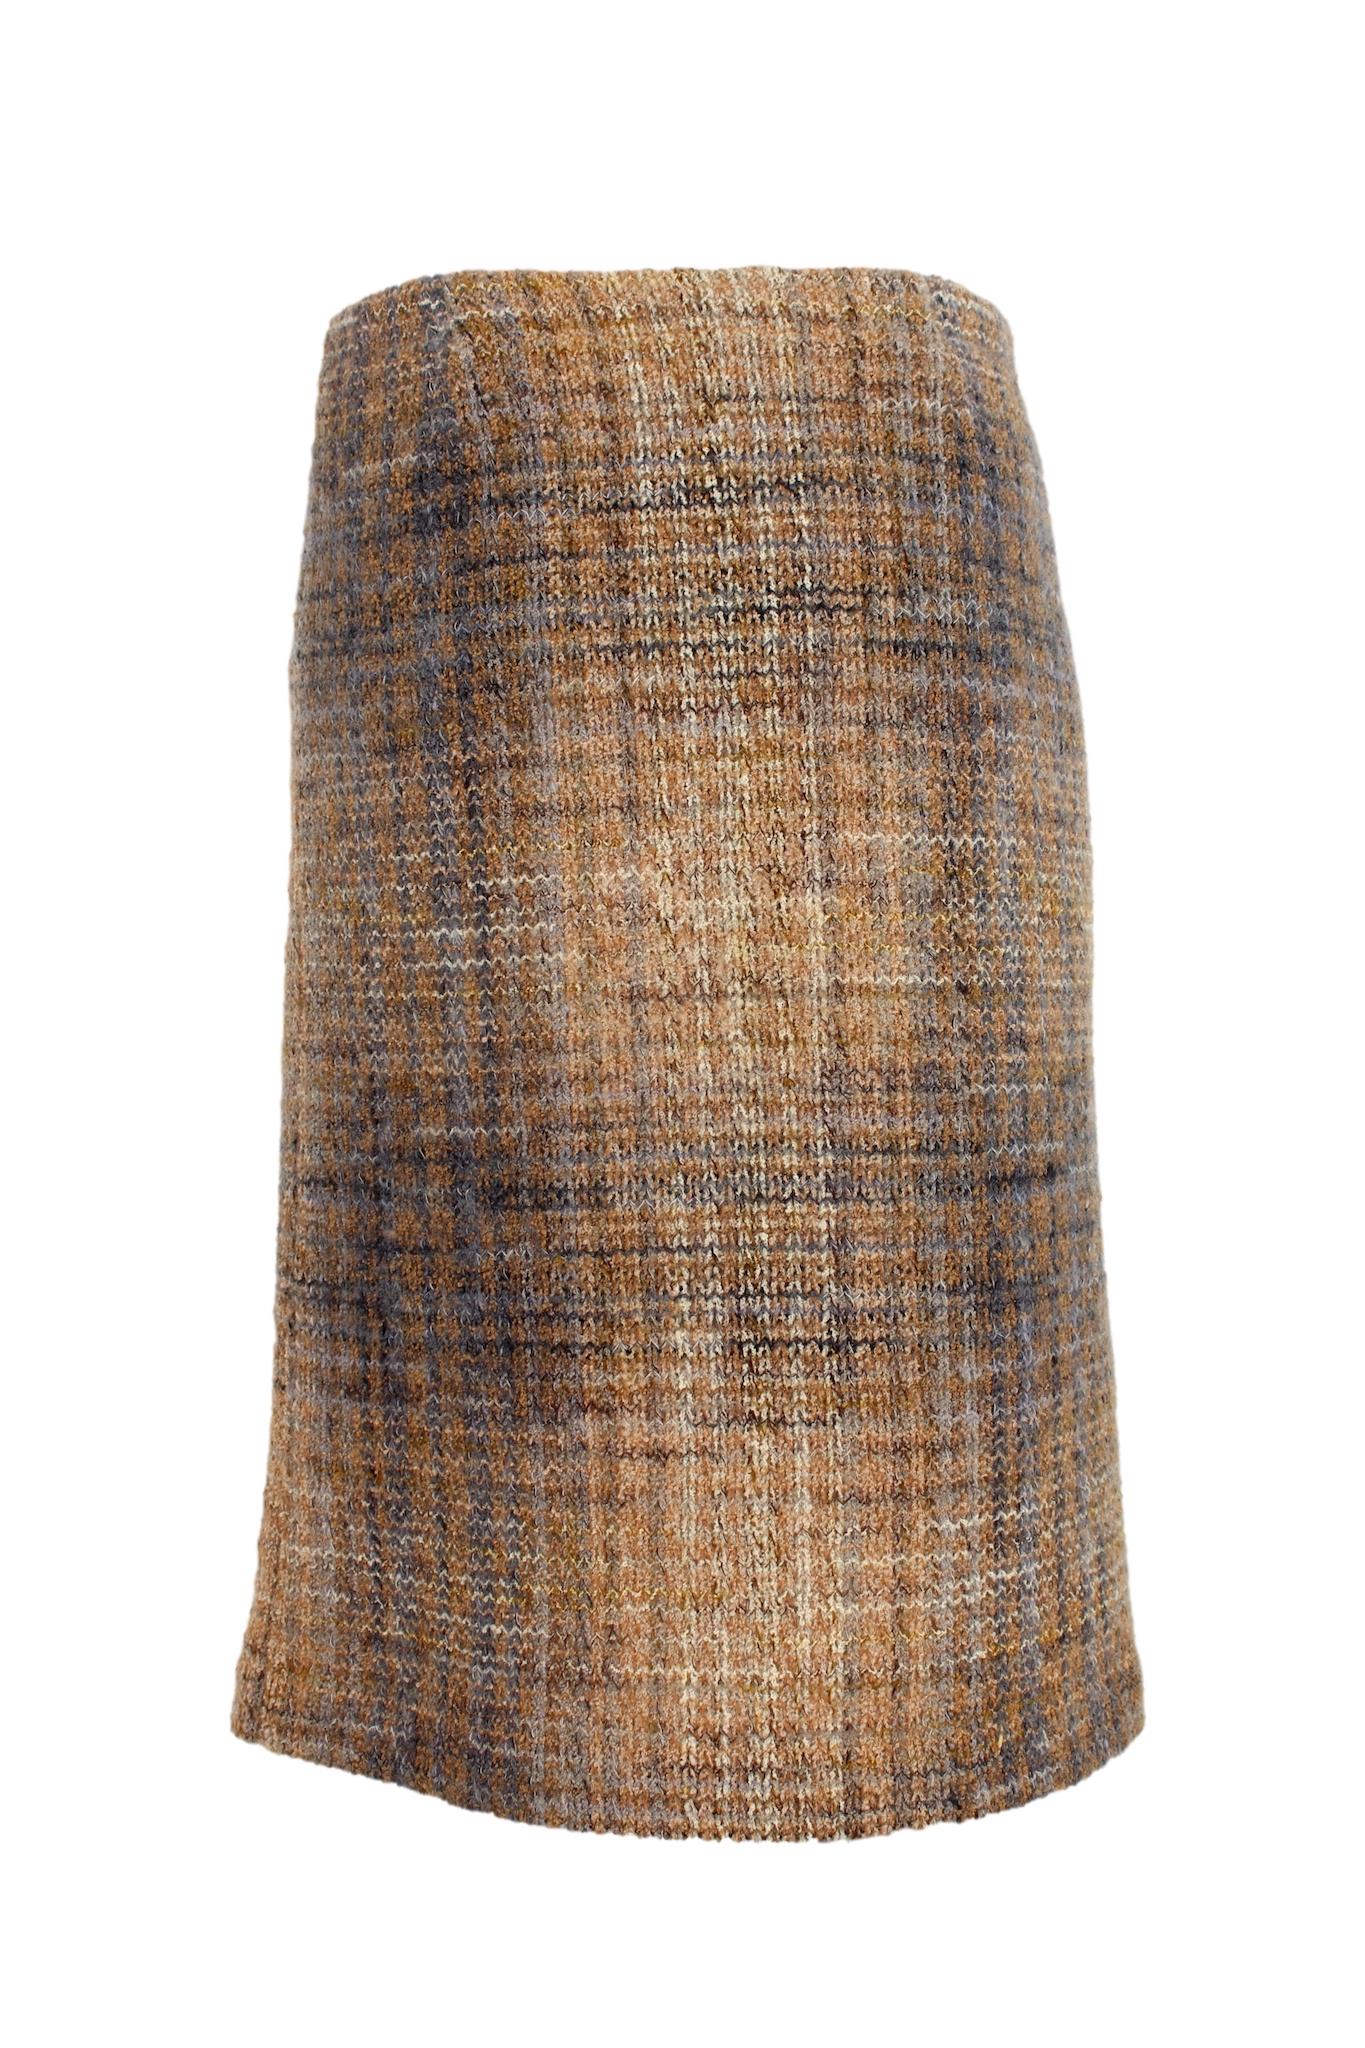 Missoni 80s vintage classic flared skirt. Blue and beige color, boucle pattern, elastic waistband, 58% wool, 24% mohair and 18% nylon fabric. Made in Italy.

Size: 44 It 10 Us 12 Uk

Waist: 38 cm
Length: 61 cm